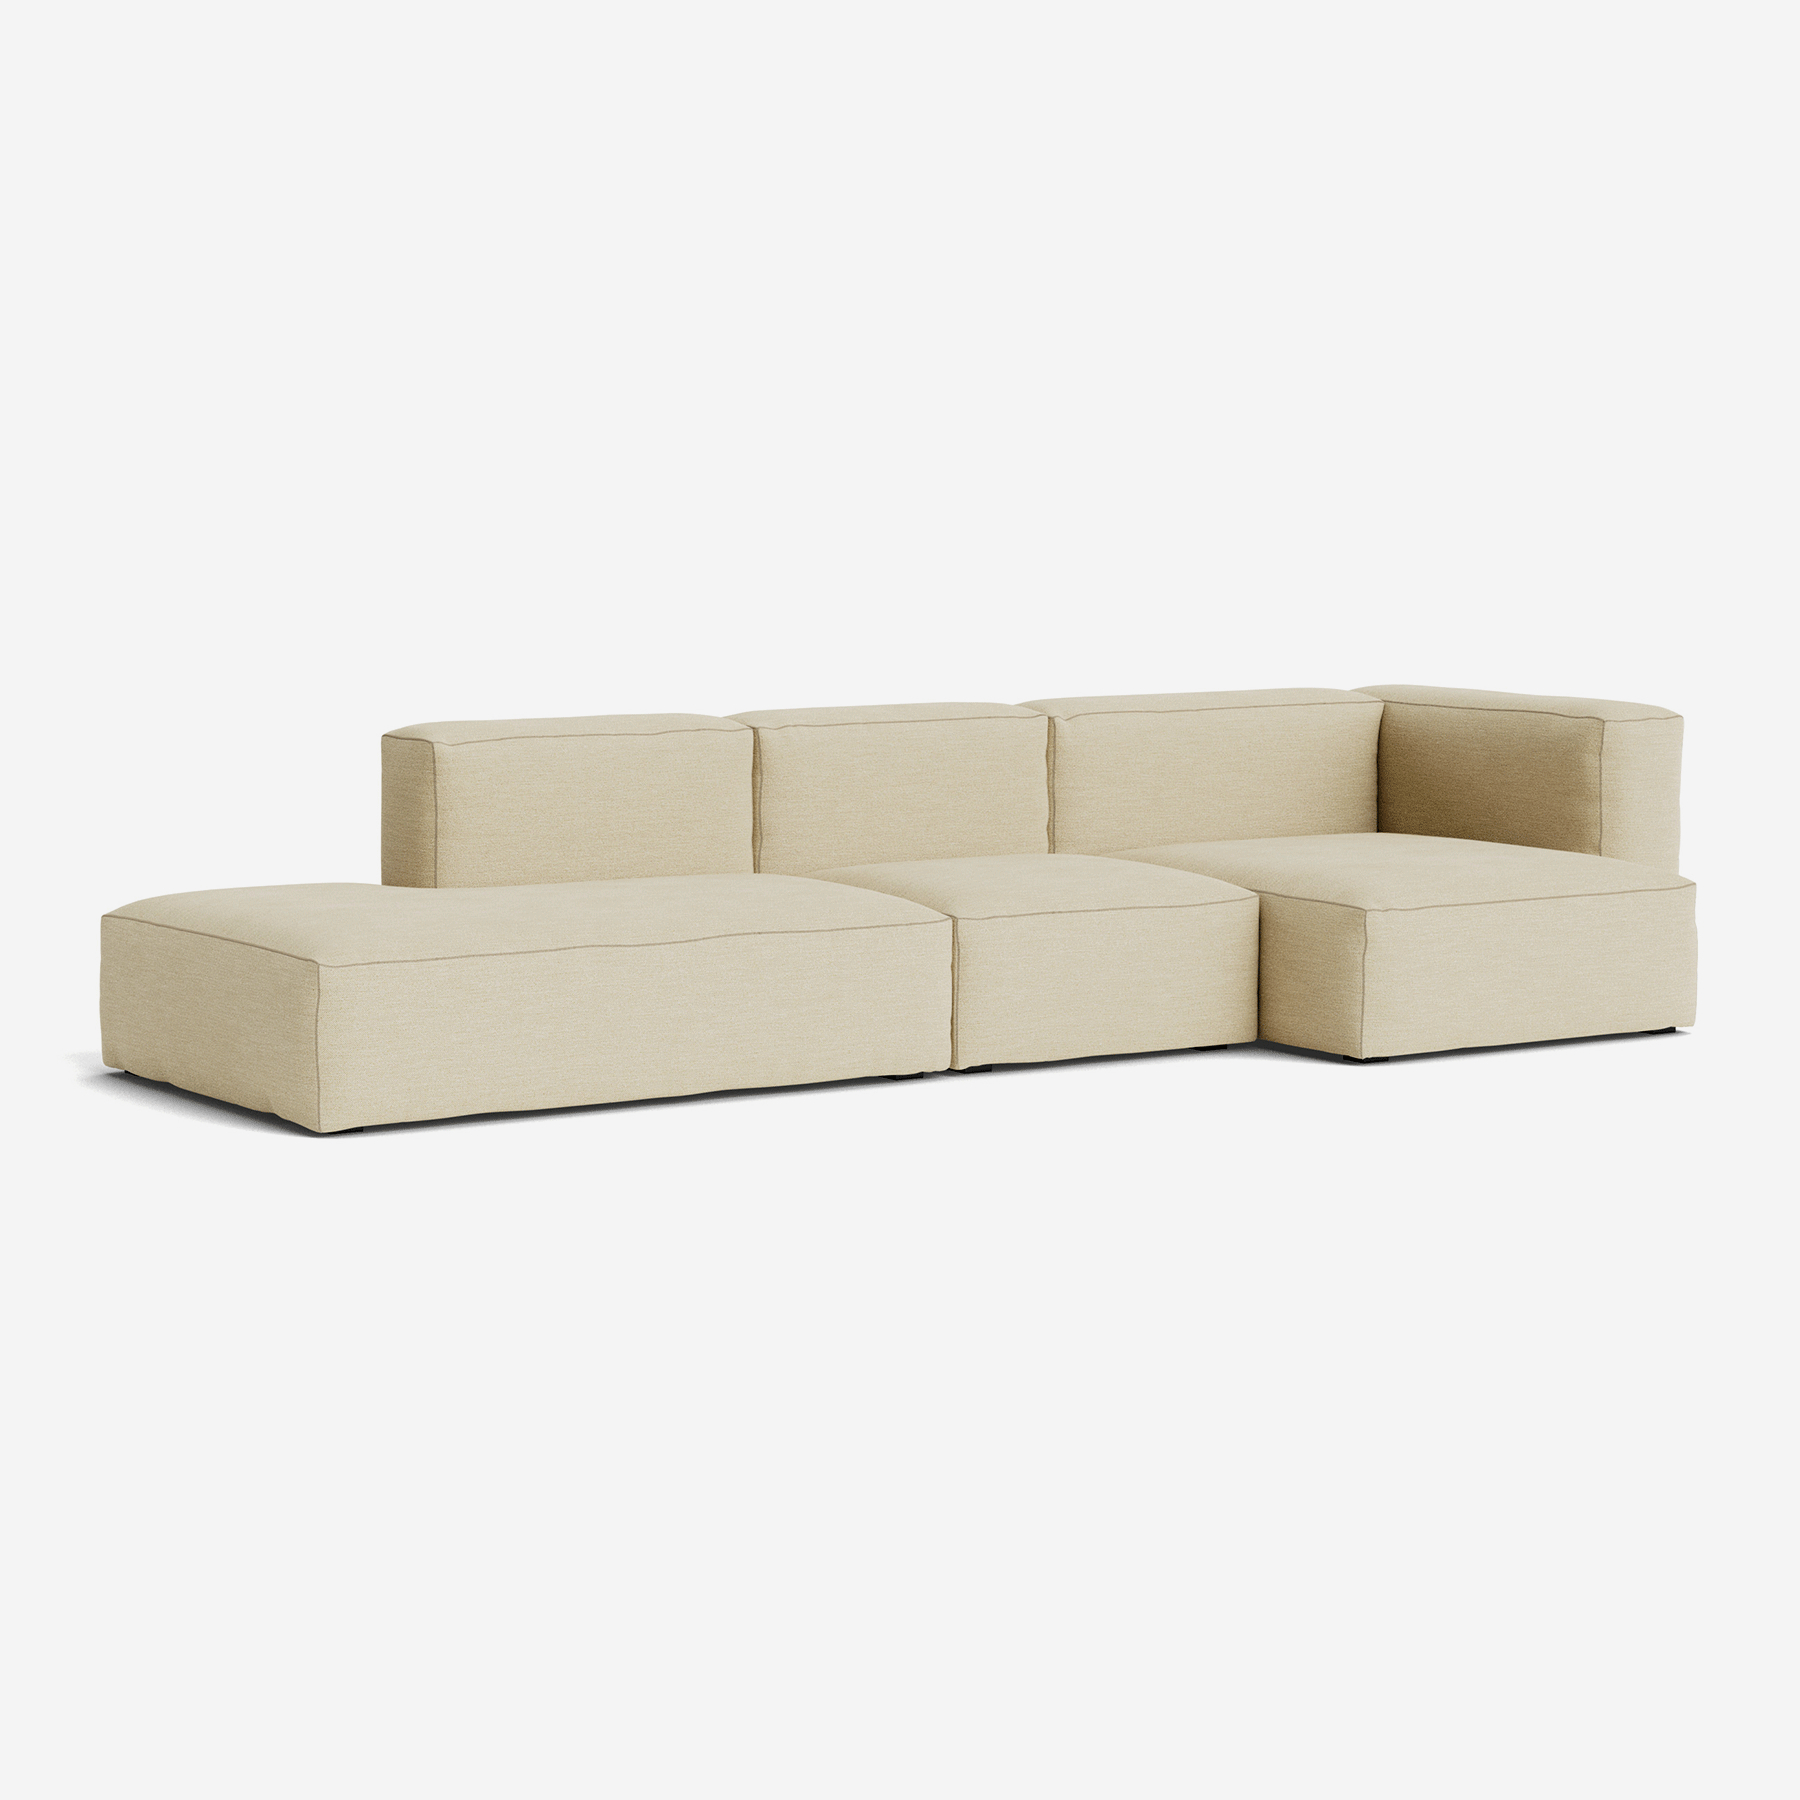 Mags Soft 3 Seater Sofa, Combination 4